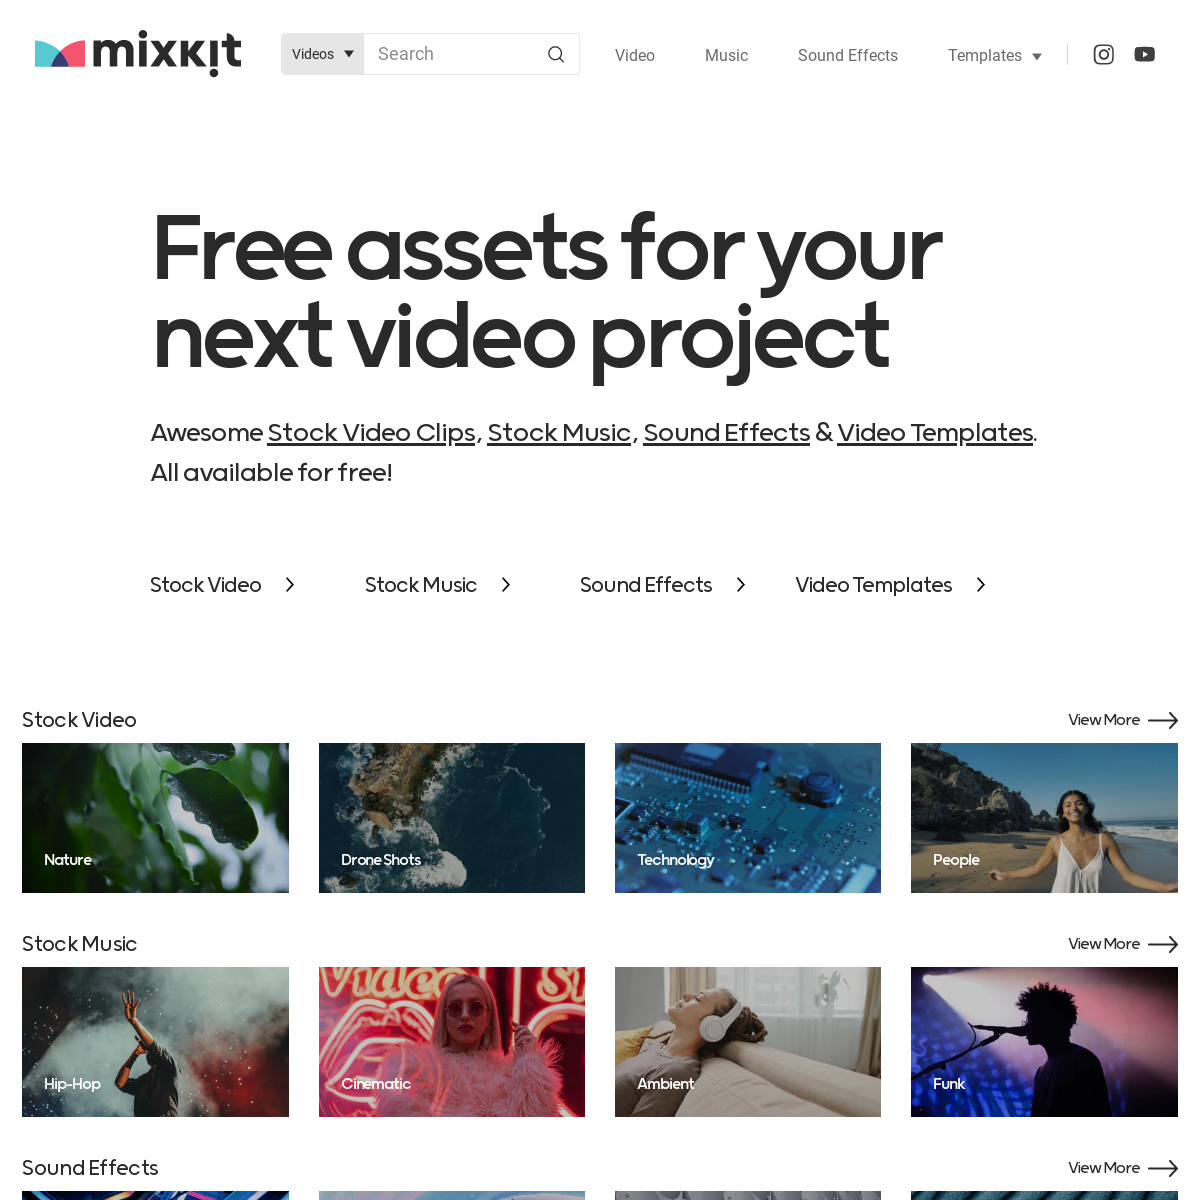 A complete backup of mixkit.co